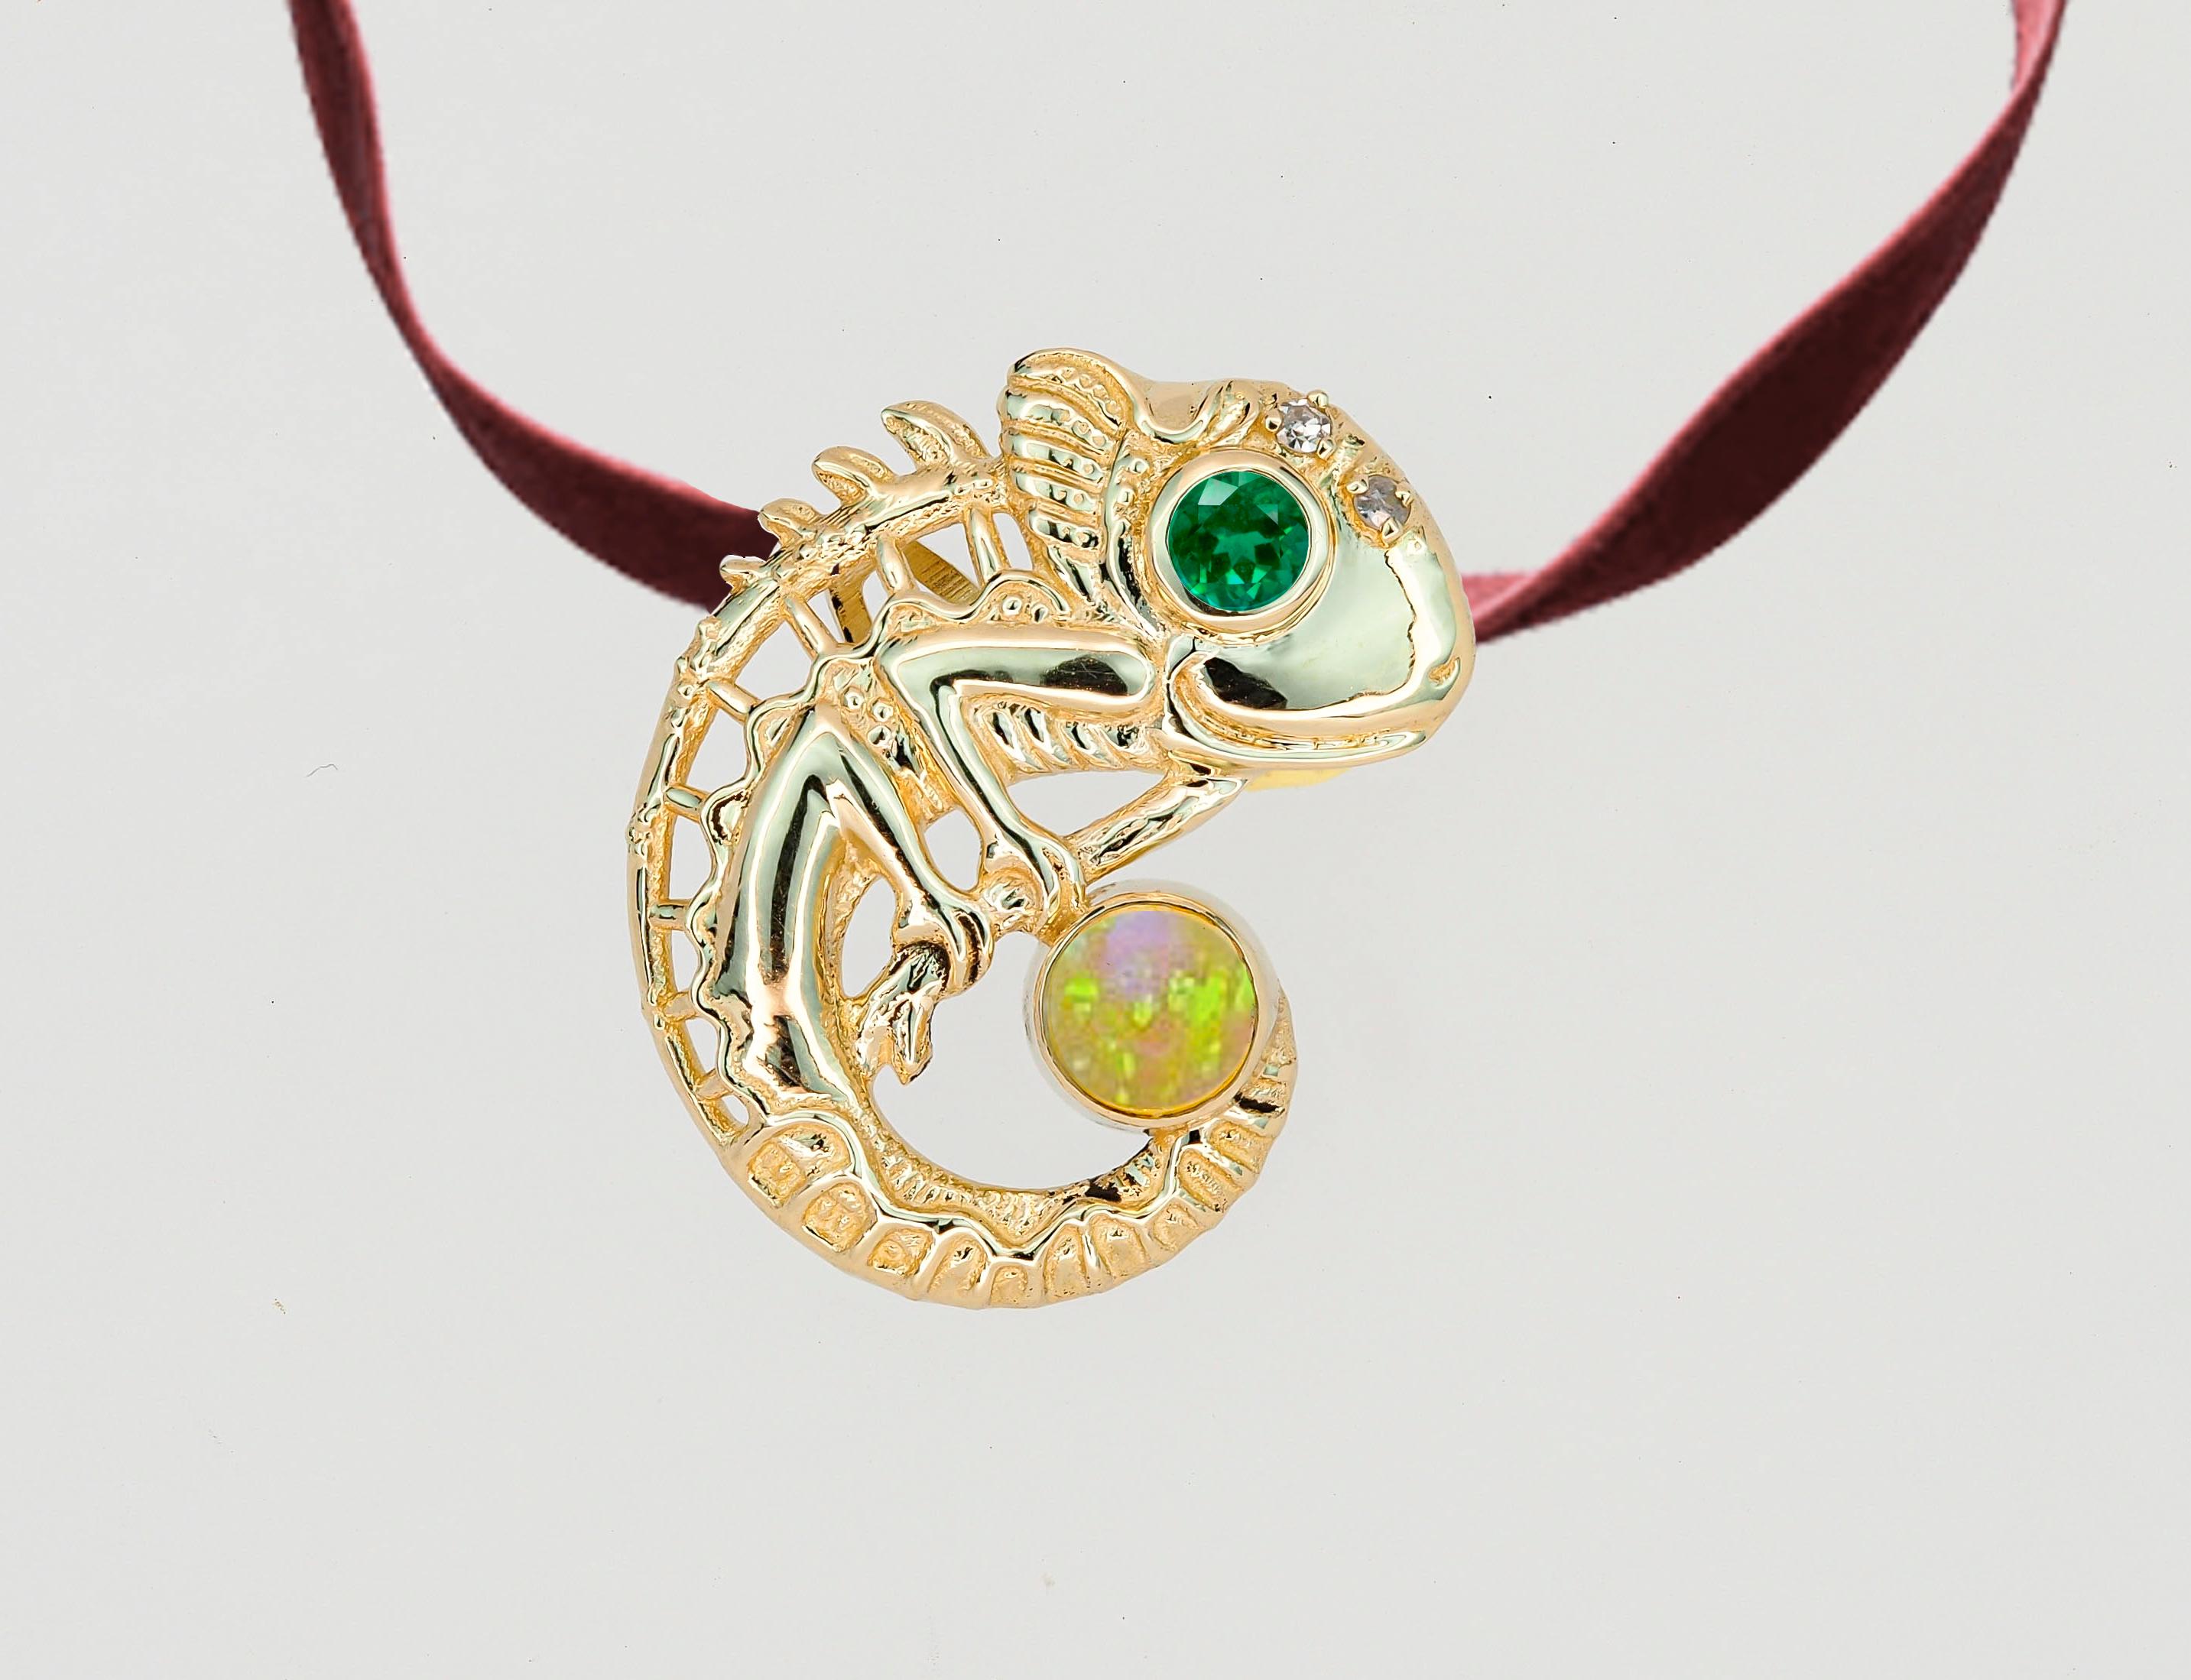 Modern 14k Gold Pendant with Opal, Emerald and Diamonds, Chameleon Pendant! For Sale